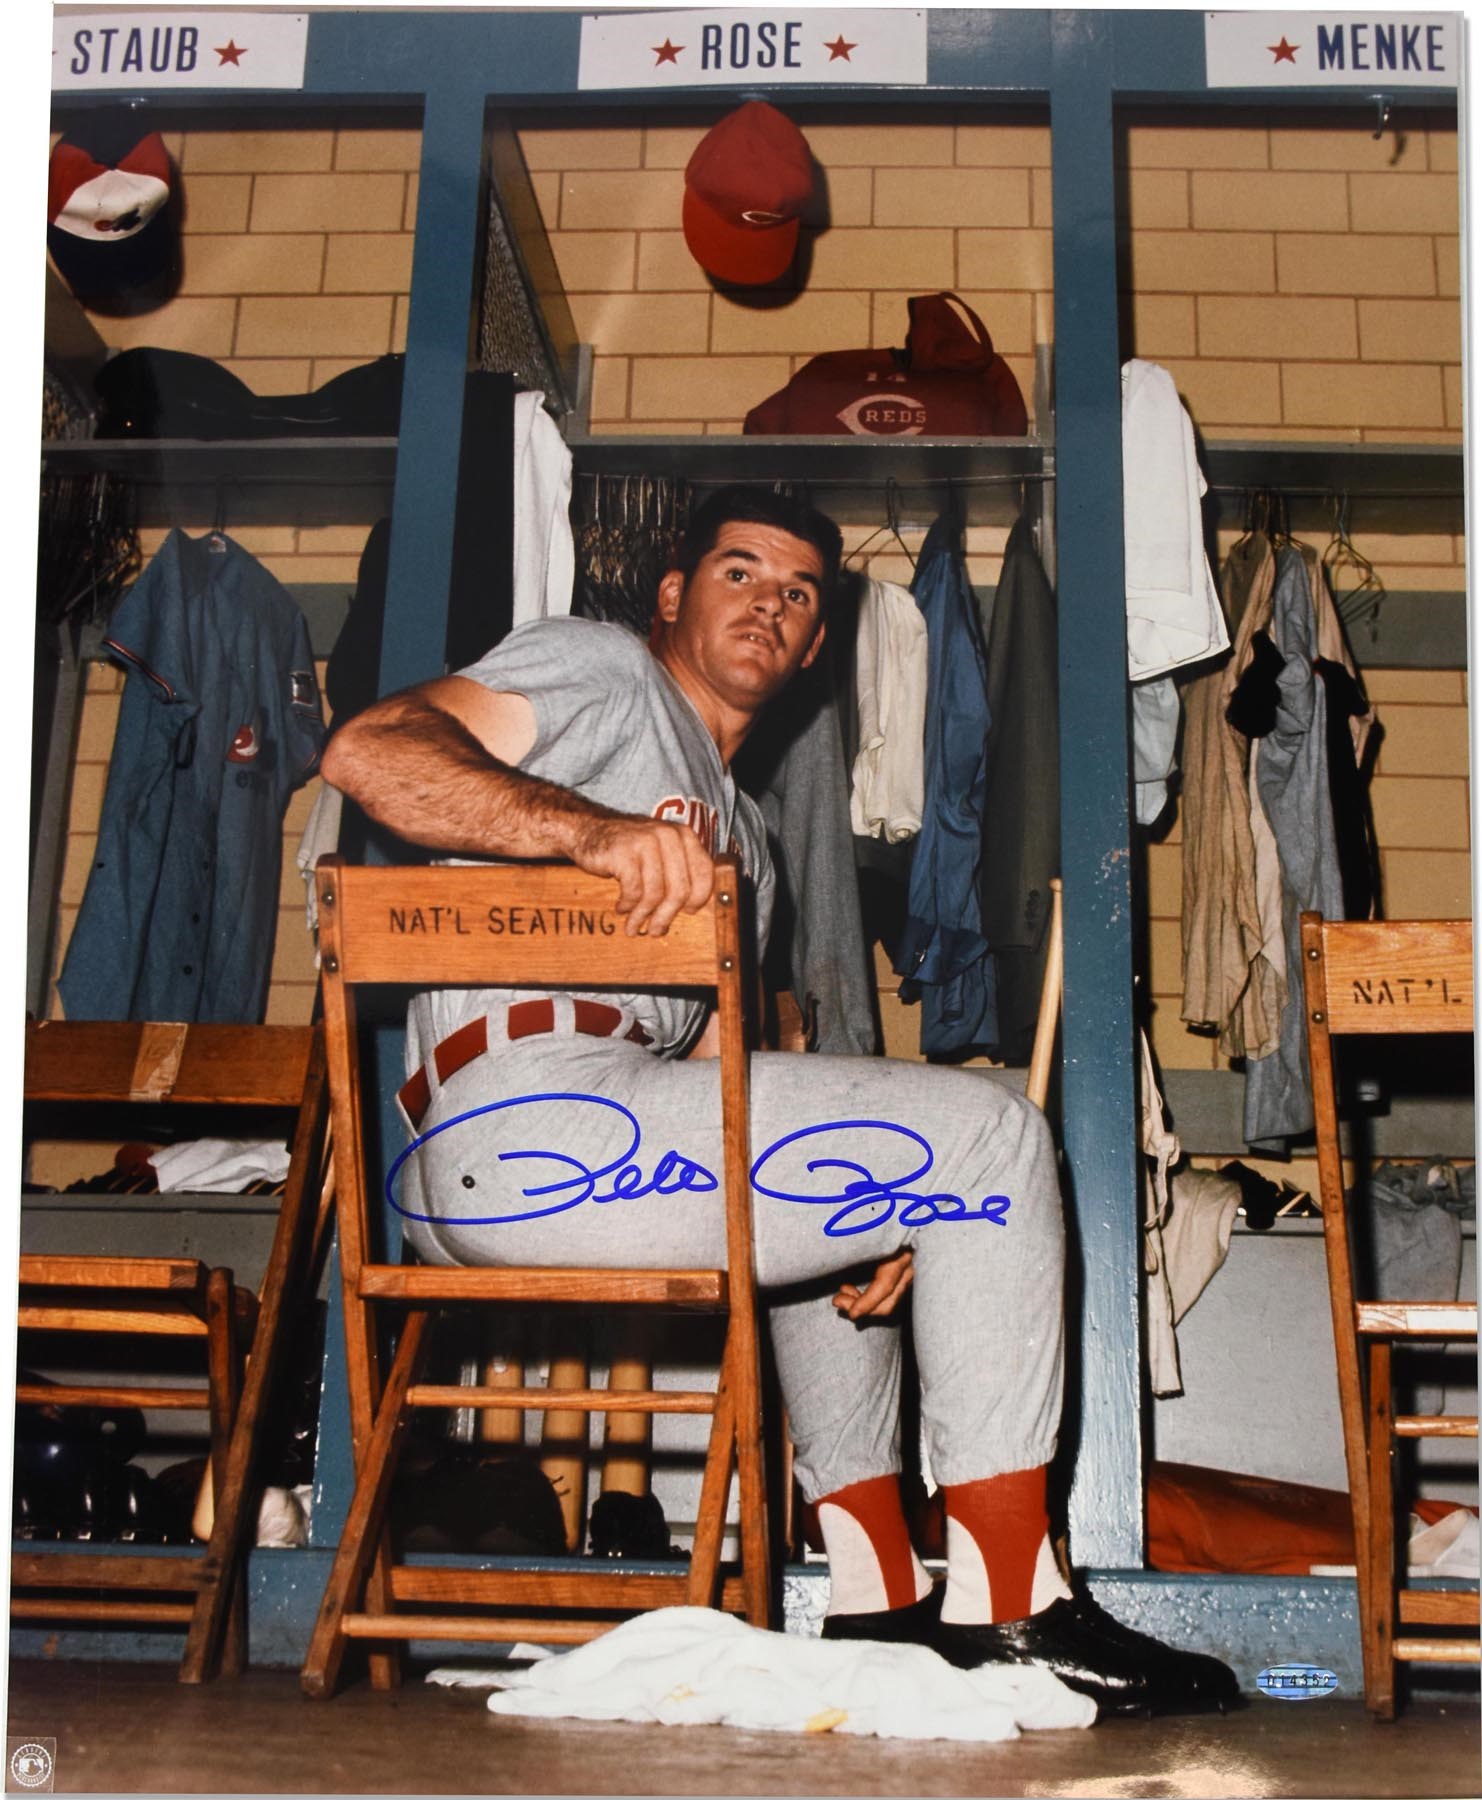 Pete Rose Signed 16x20" Photo (Steiner)